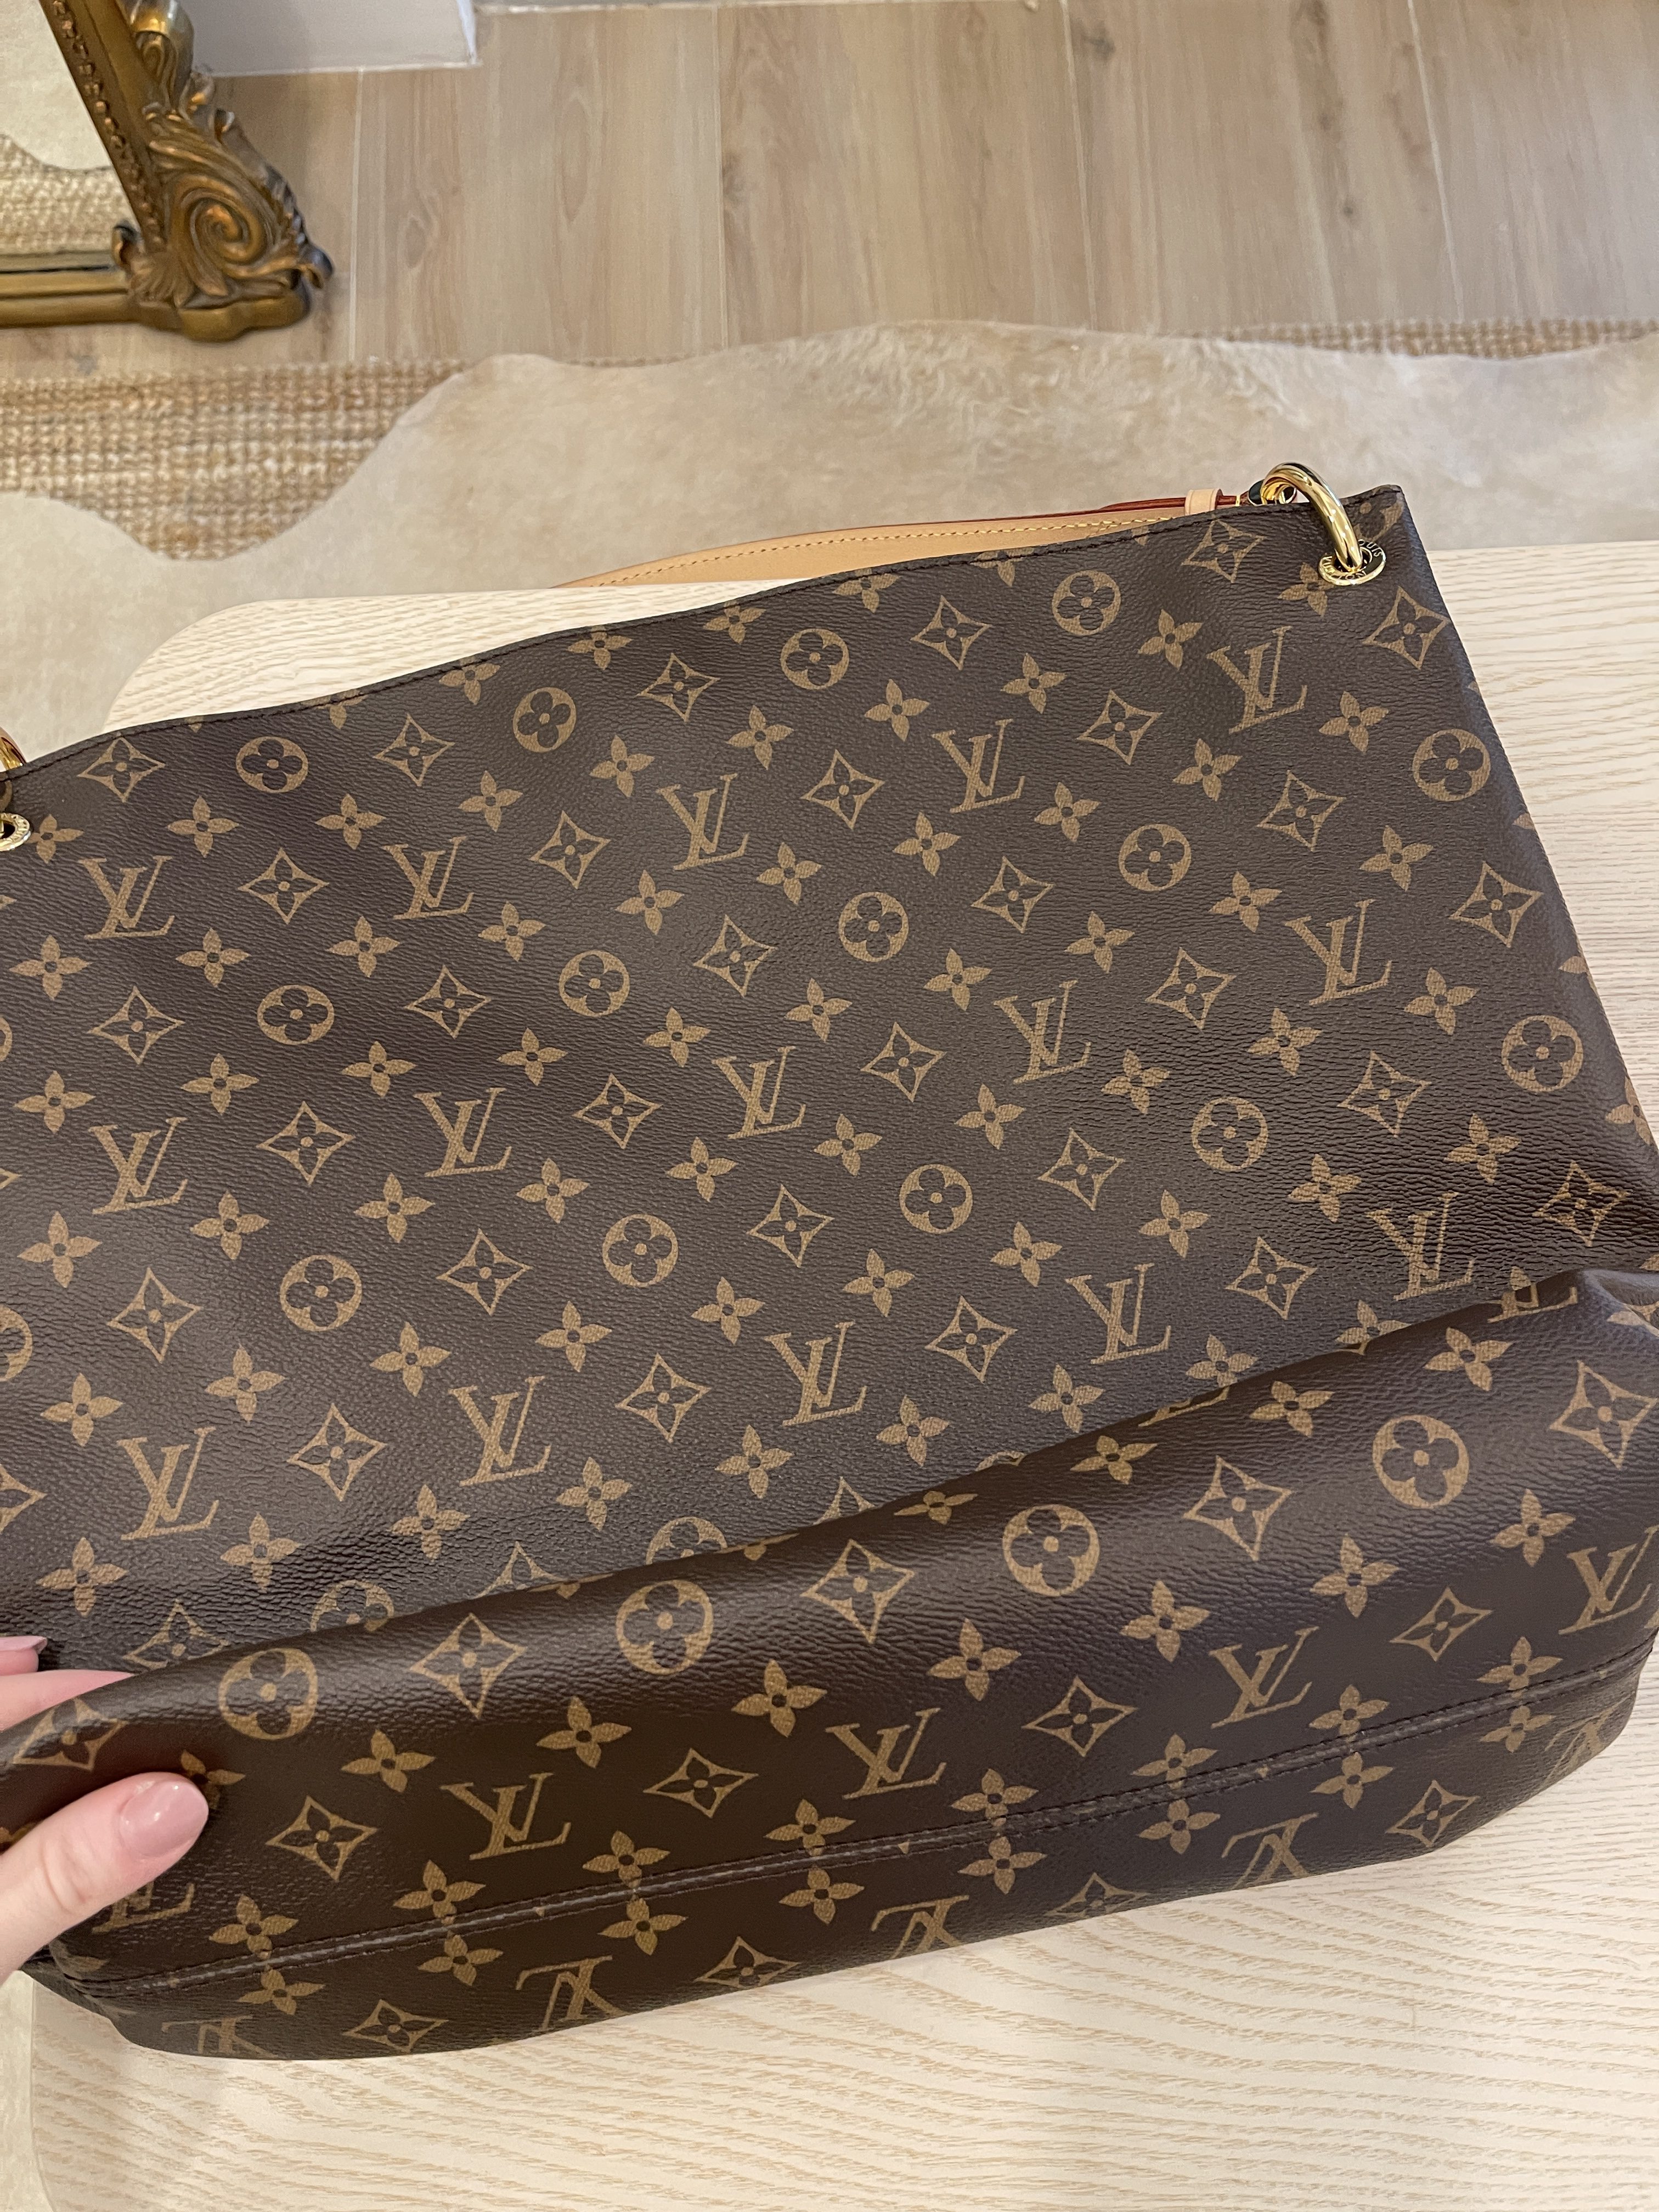 Naughtipidgins Nest - New* Louis Vuitton Graceful MM in Monogram Beige. RRP  £1,100. A curvy, soft sided, everyday bag, its capacious yet light & just  so easy to use. Wear the front